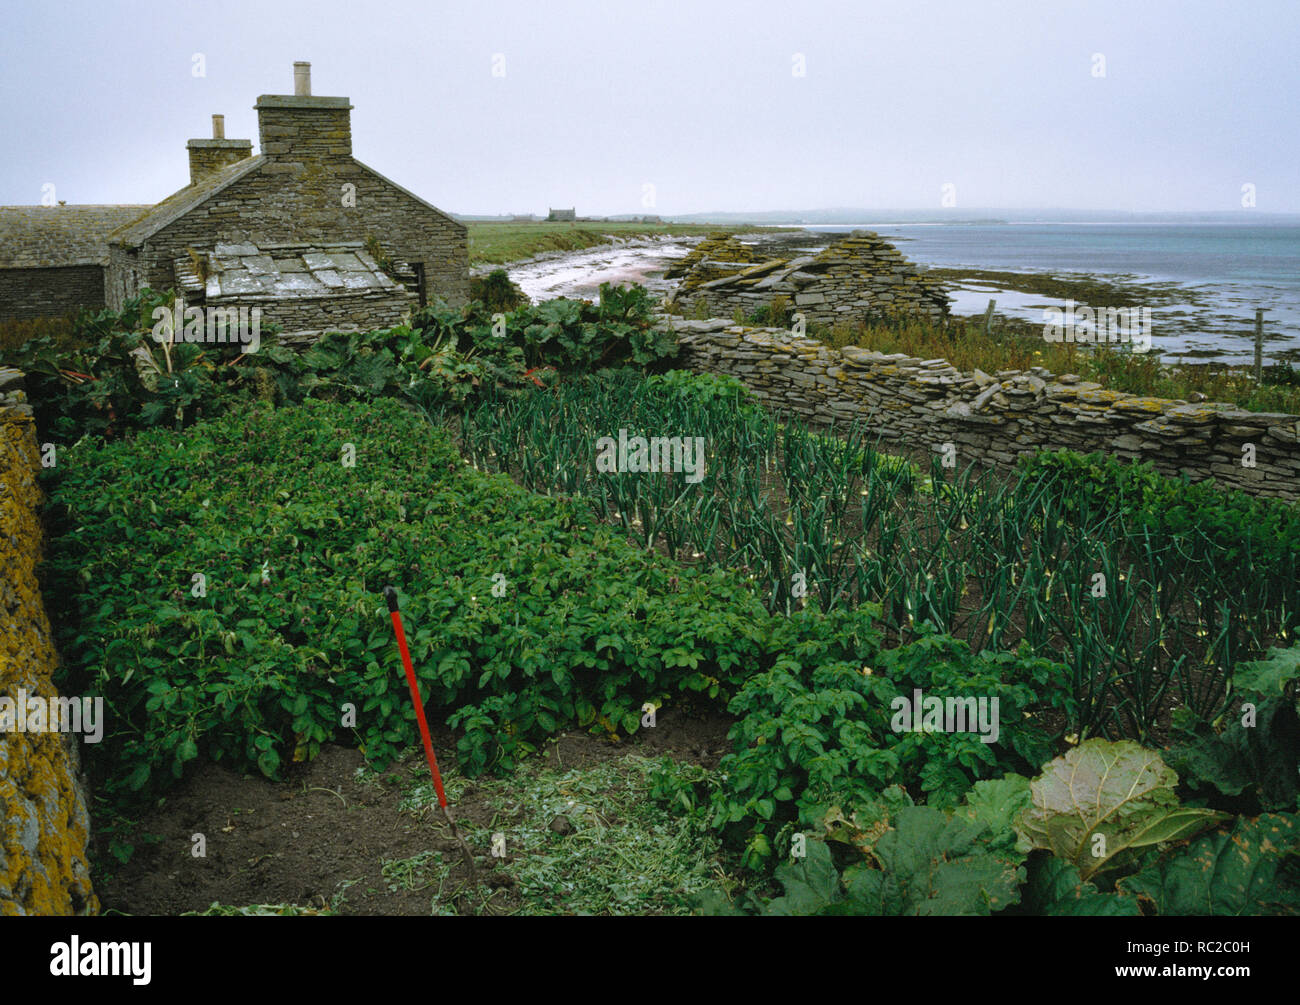 Ruined croft on Papa Westray, Orkney. Its walled garden still used for growing vegetables. Drystone walls provide shelter from wind and animals. Stock Photo